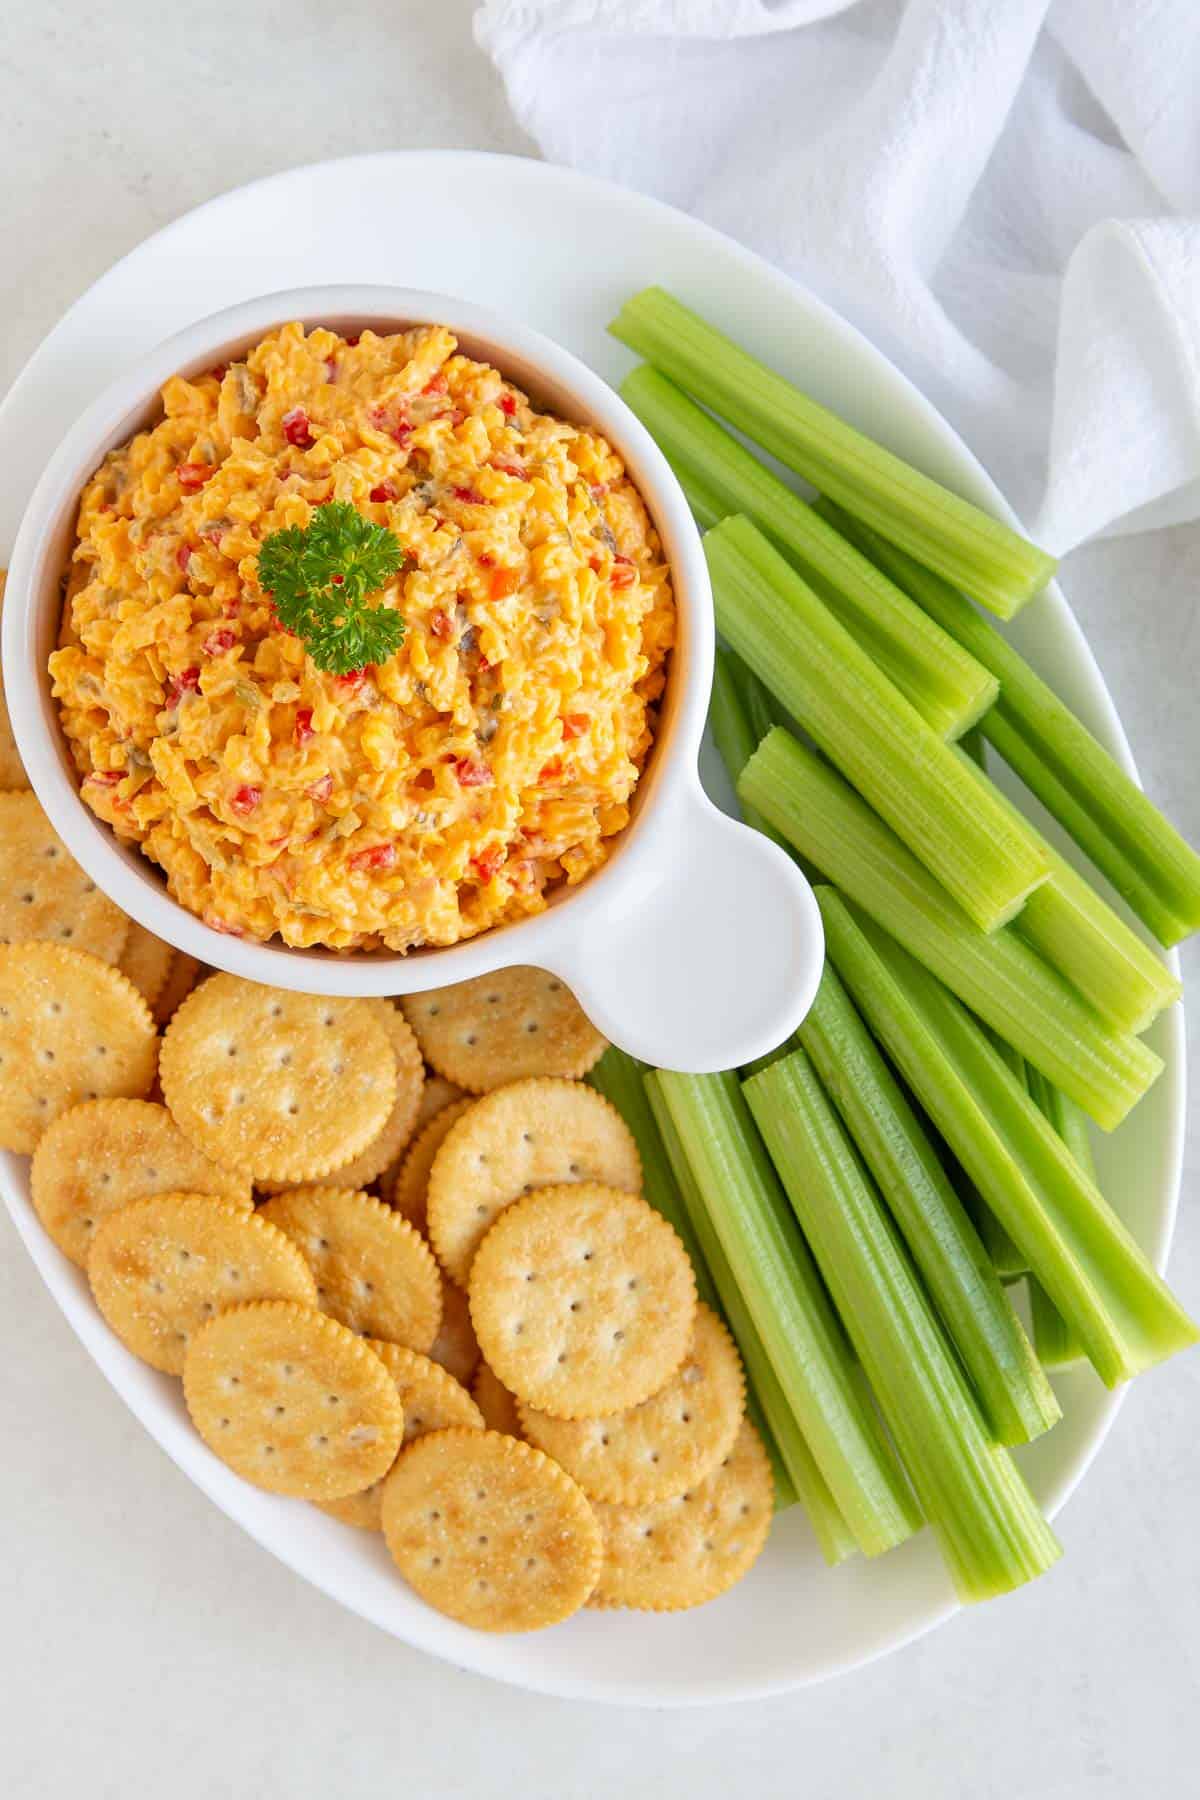 Overhead view of a bowl of pimento cheese spread on an oval white platter with crackers and celery sticks.